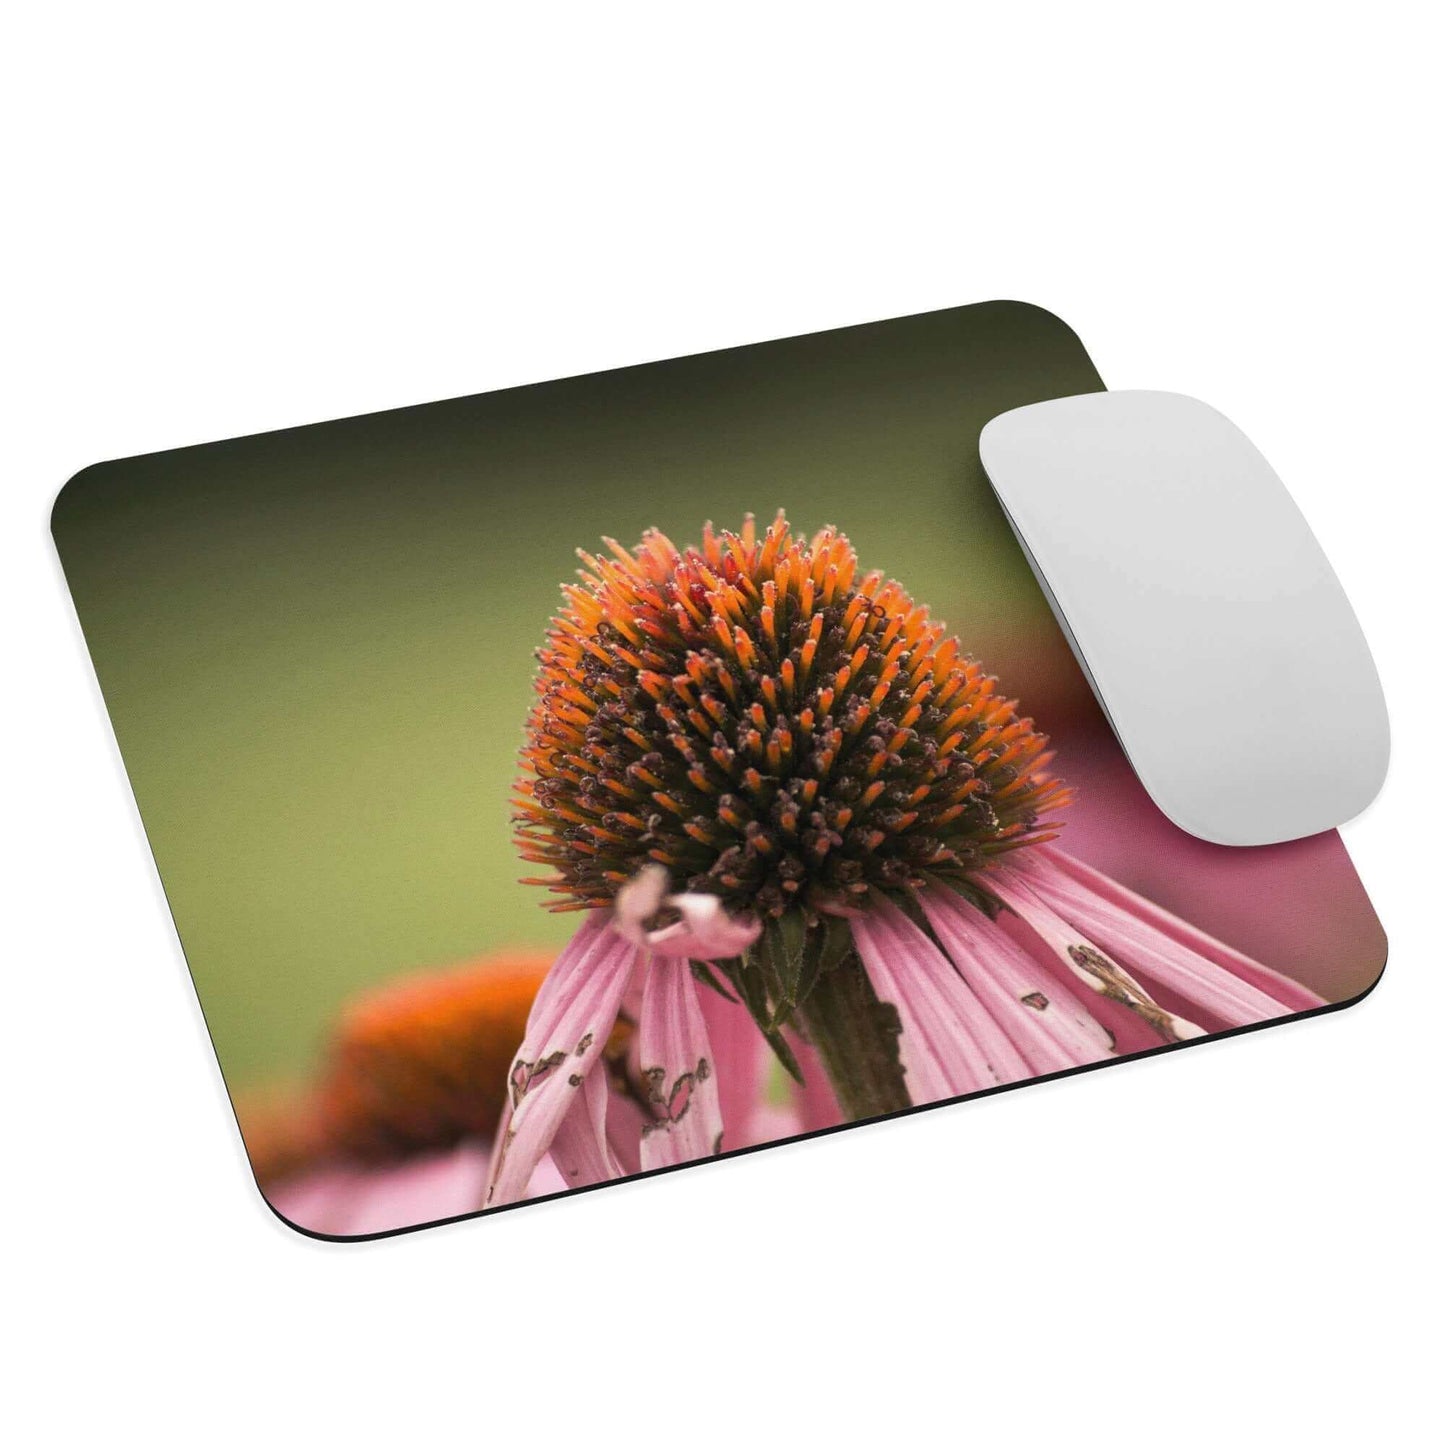 Cone flower up close - Mouse pad - Horrible Designs